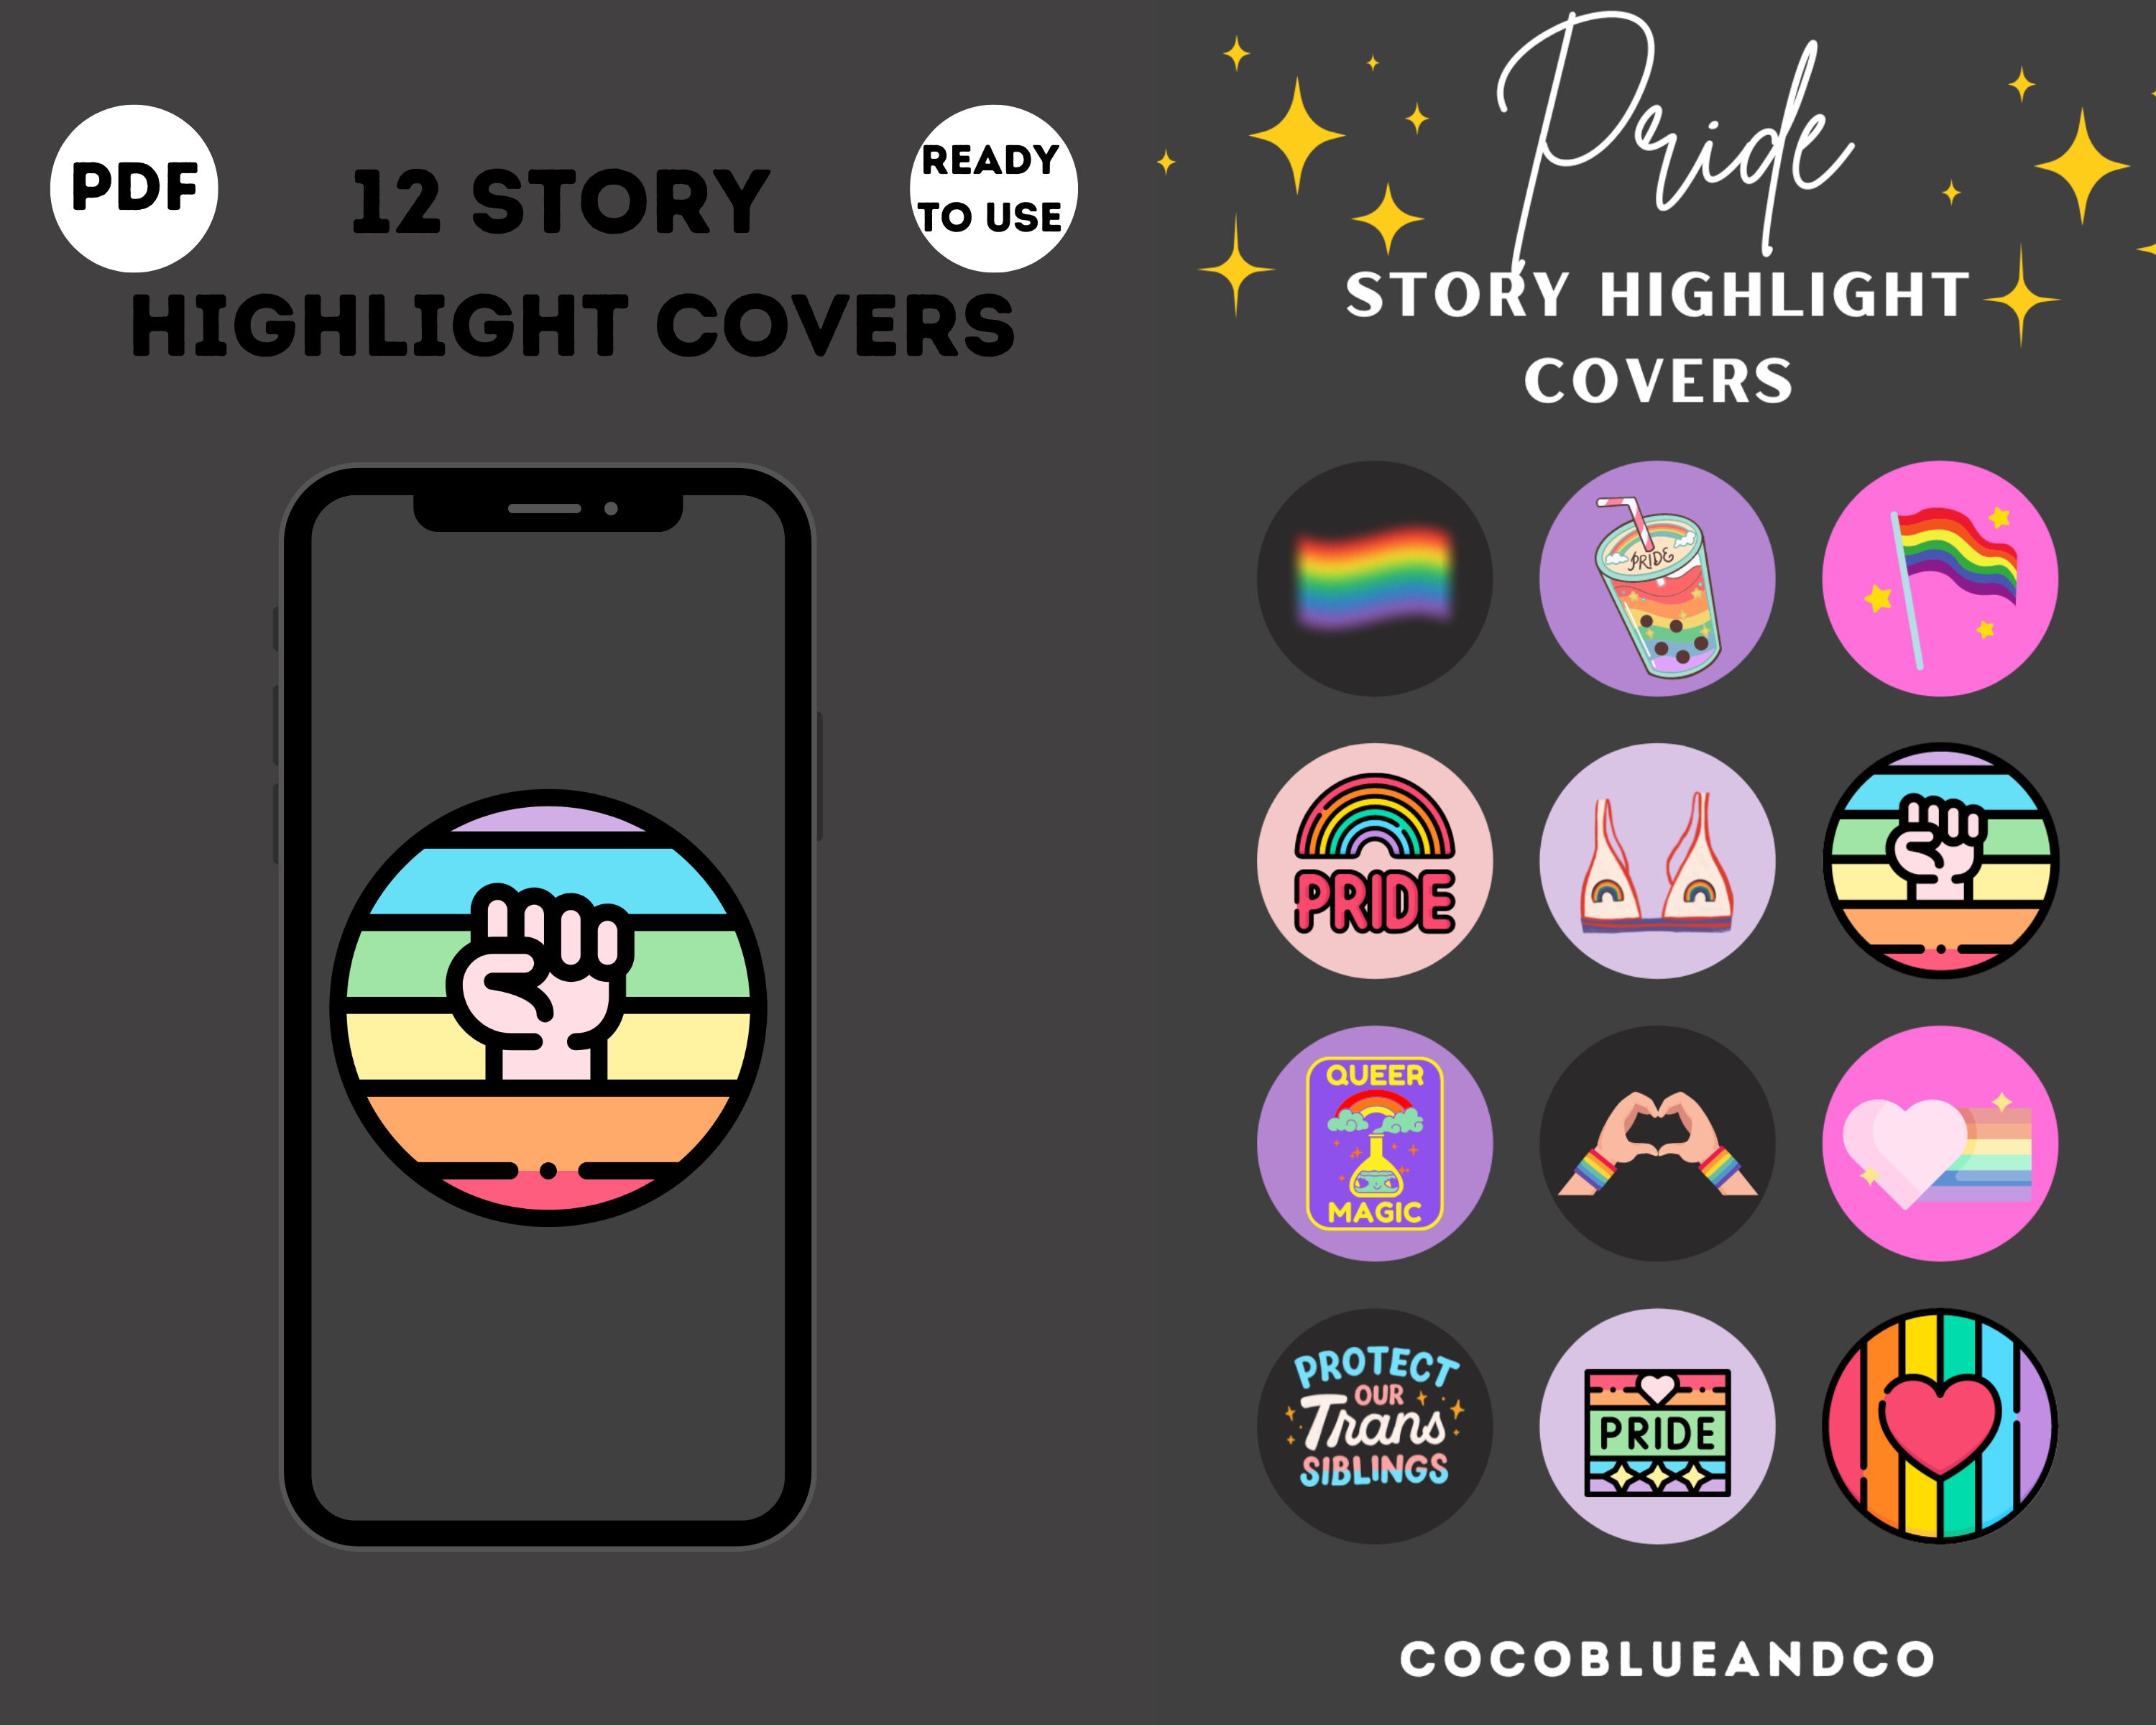 Instagram: How to Use the 2022 Pride Stickers in Stories